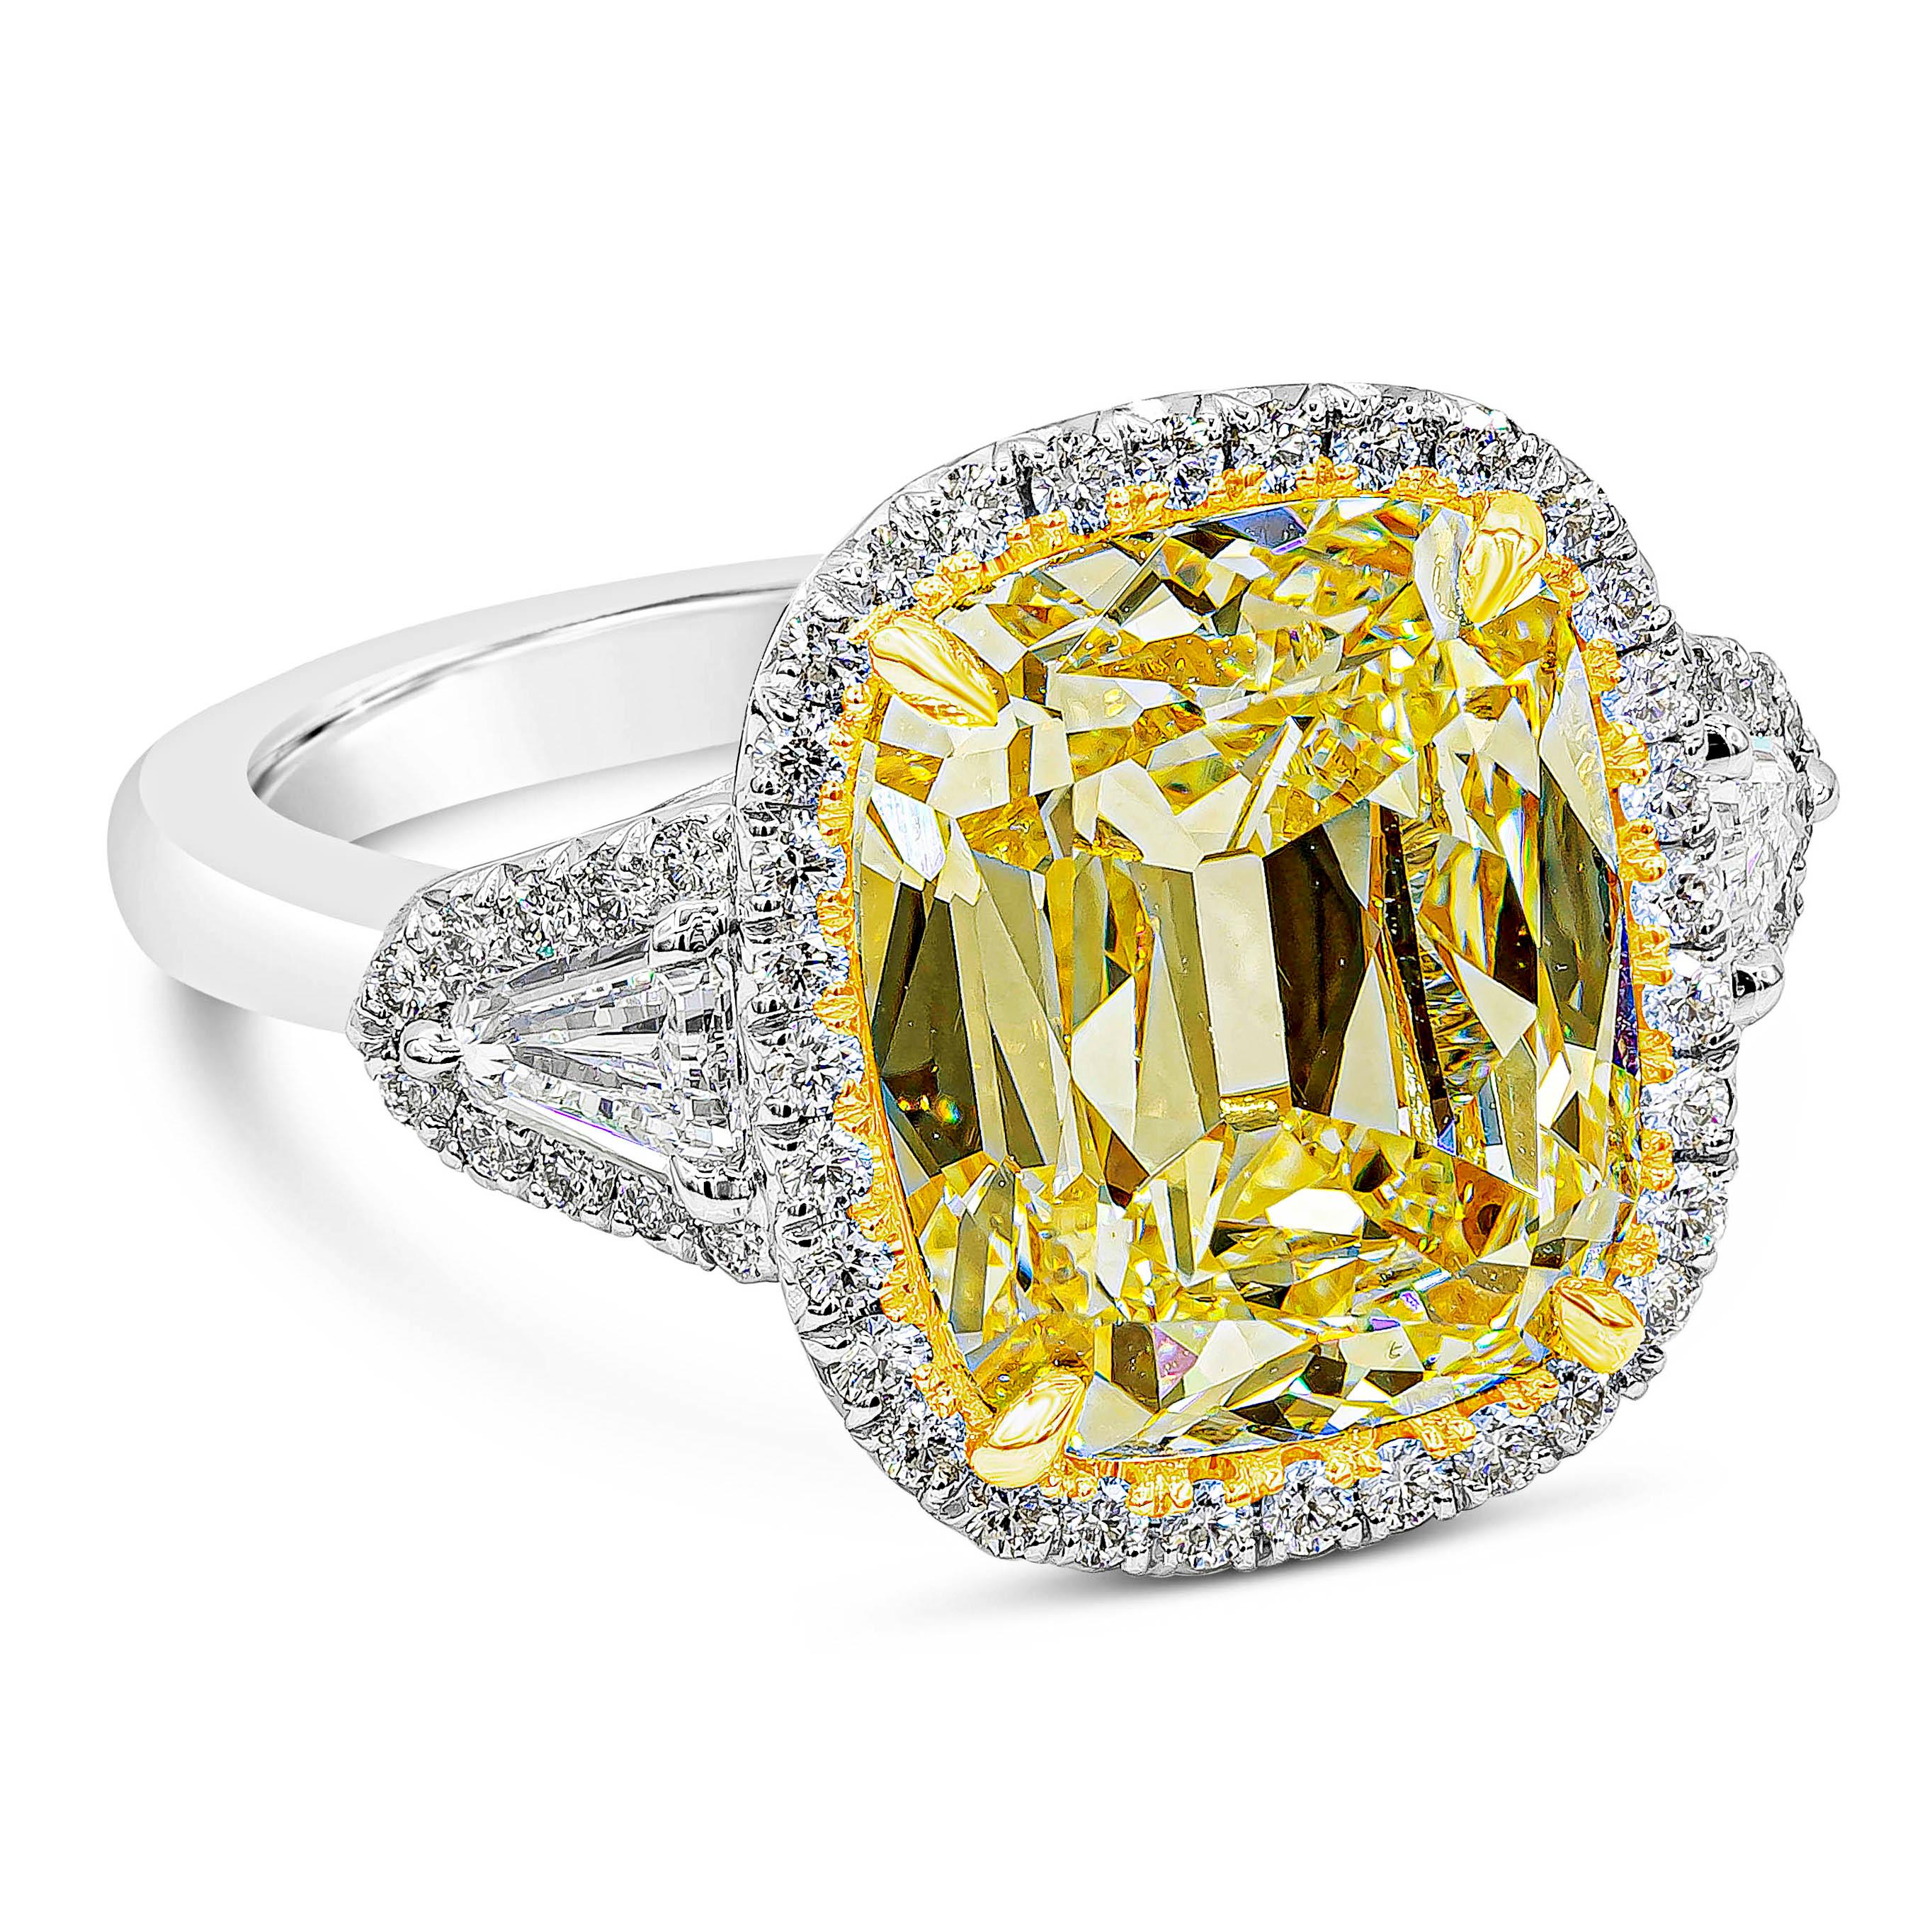 A well-crafted engagement ring showcasing a GIA certified 6.47 carat light yellow cushion brilliant cut diamond, U-V color and SI1 in clarity, set in four prong basket made in 18K yellow gold. Surrounded by brilliant diamonds in halo setting,